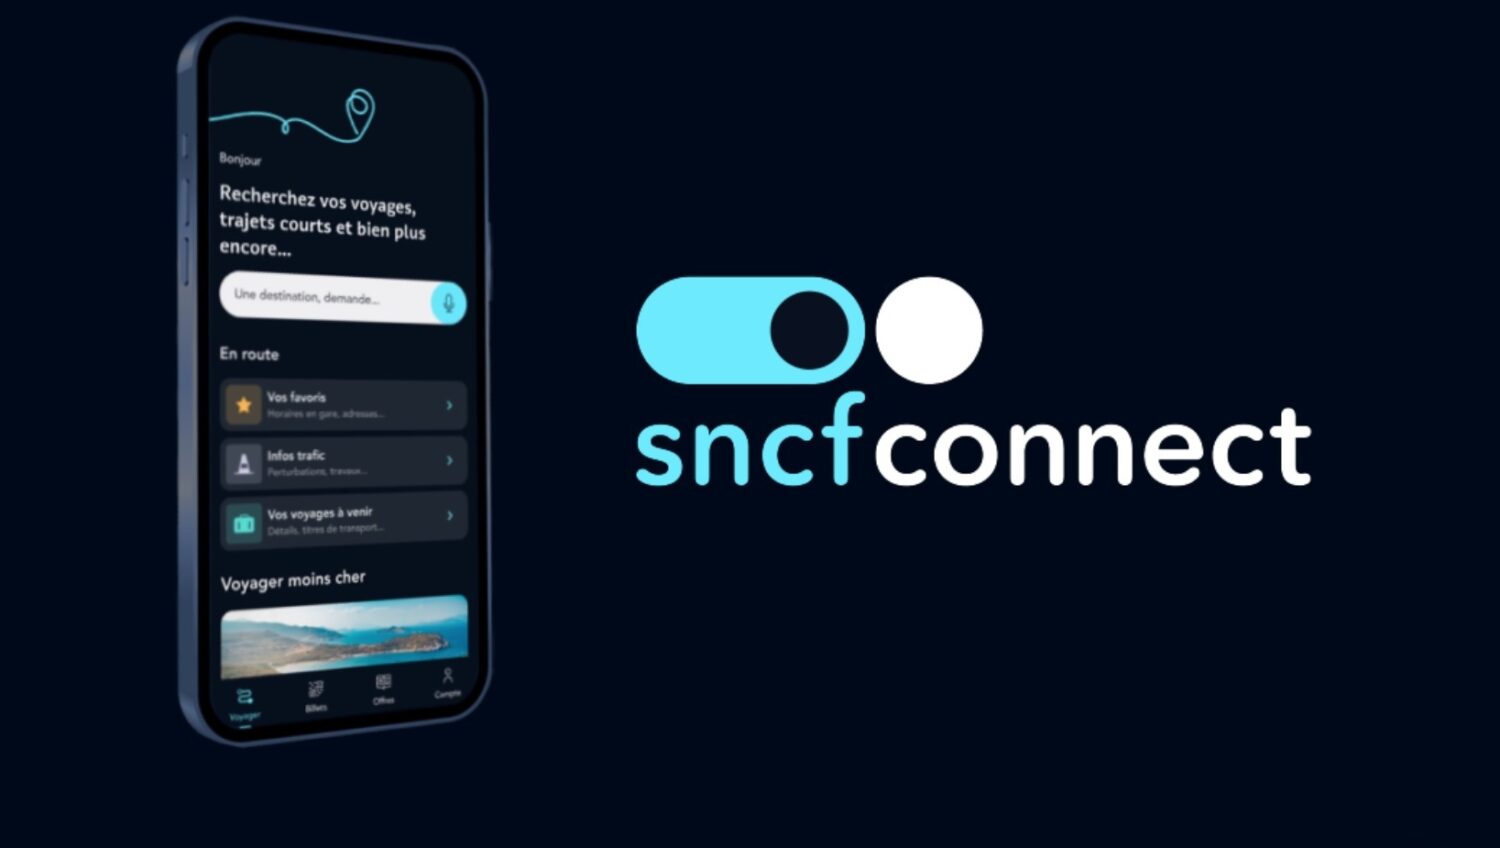 sncf-connect-application